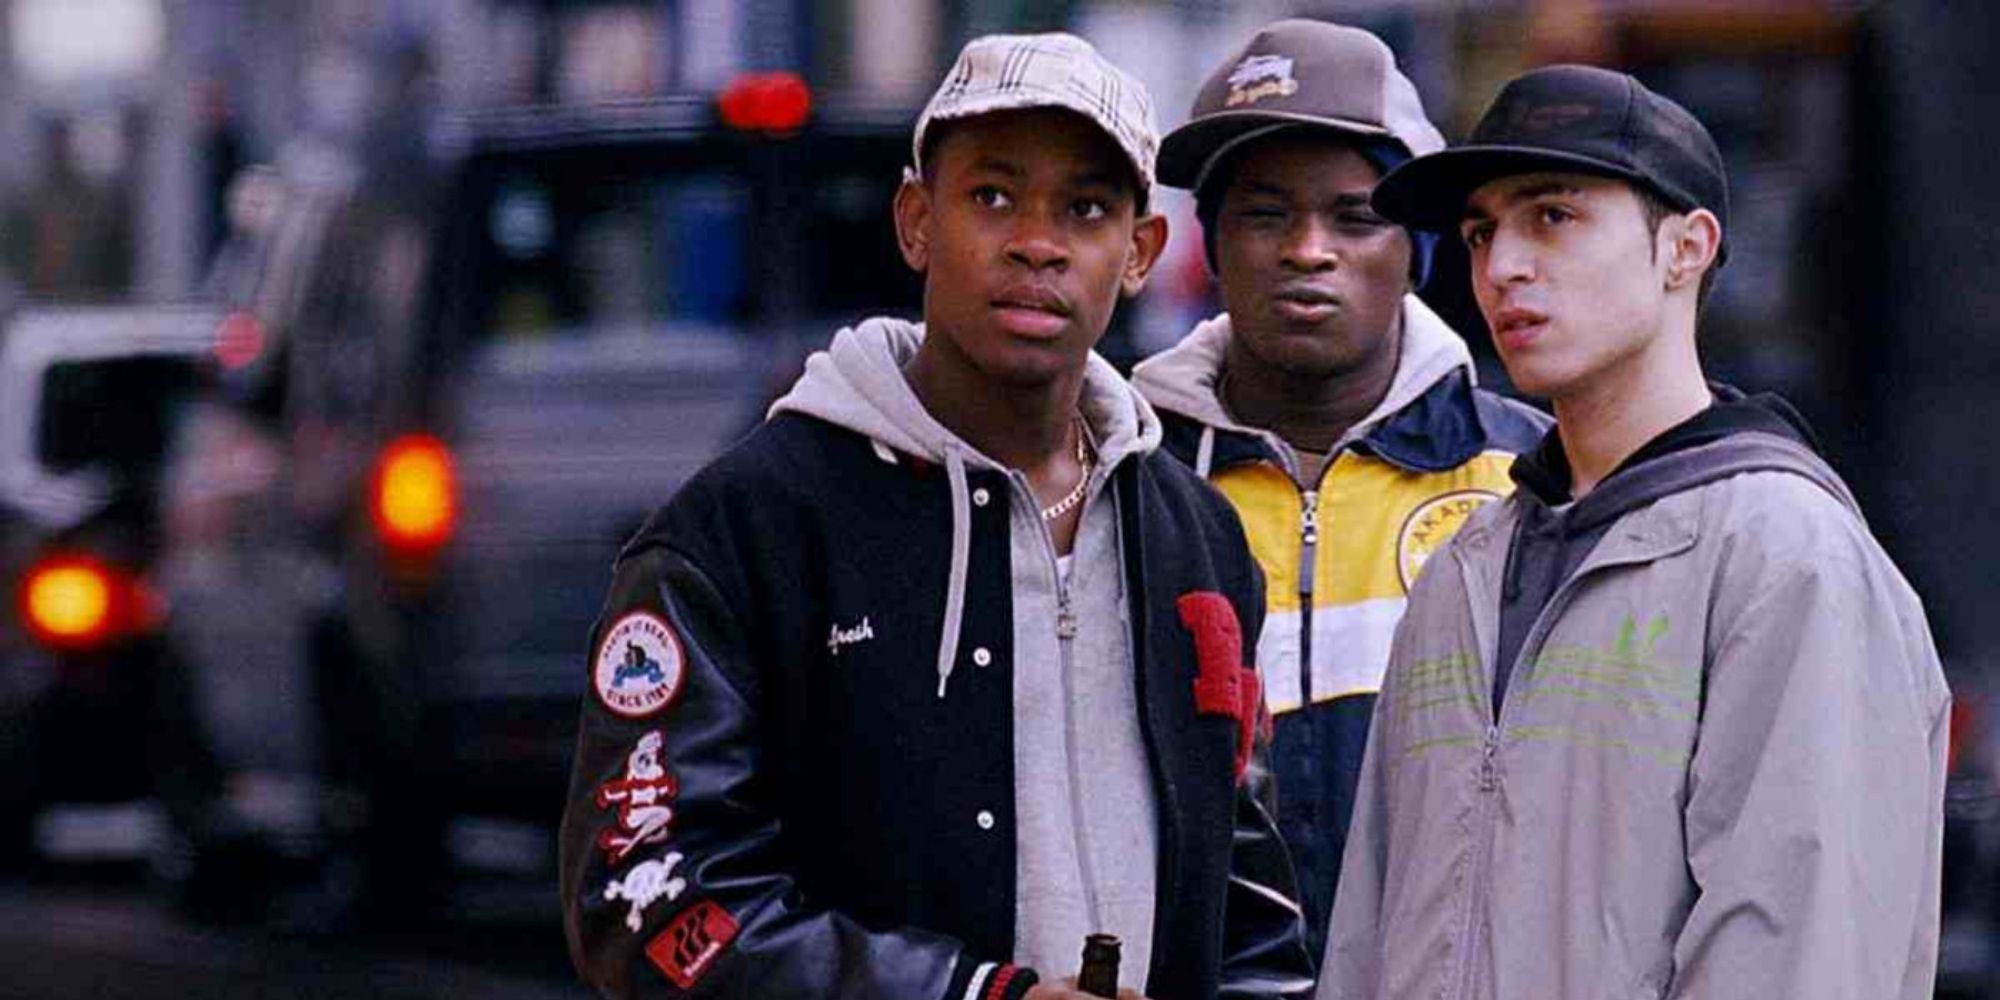 Official image of the movie Kidulthood (2006).